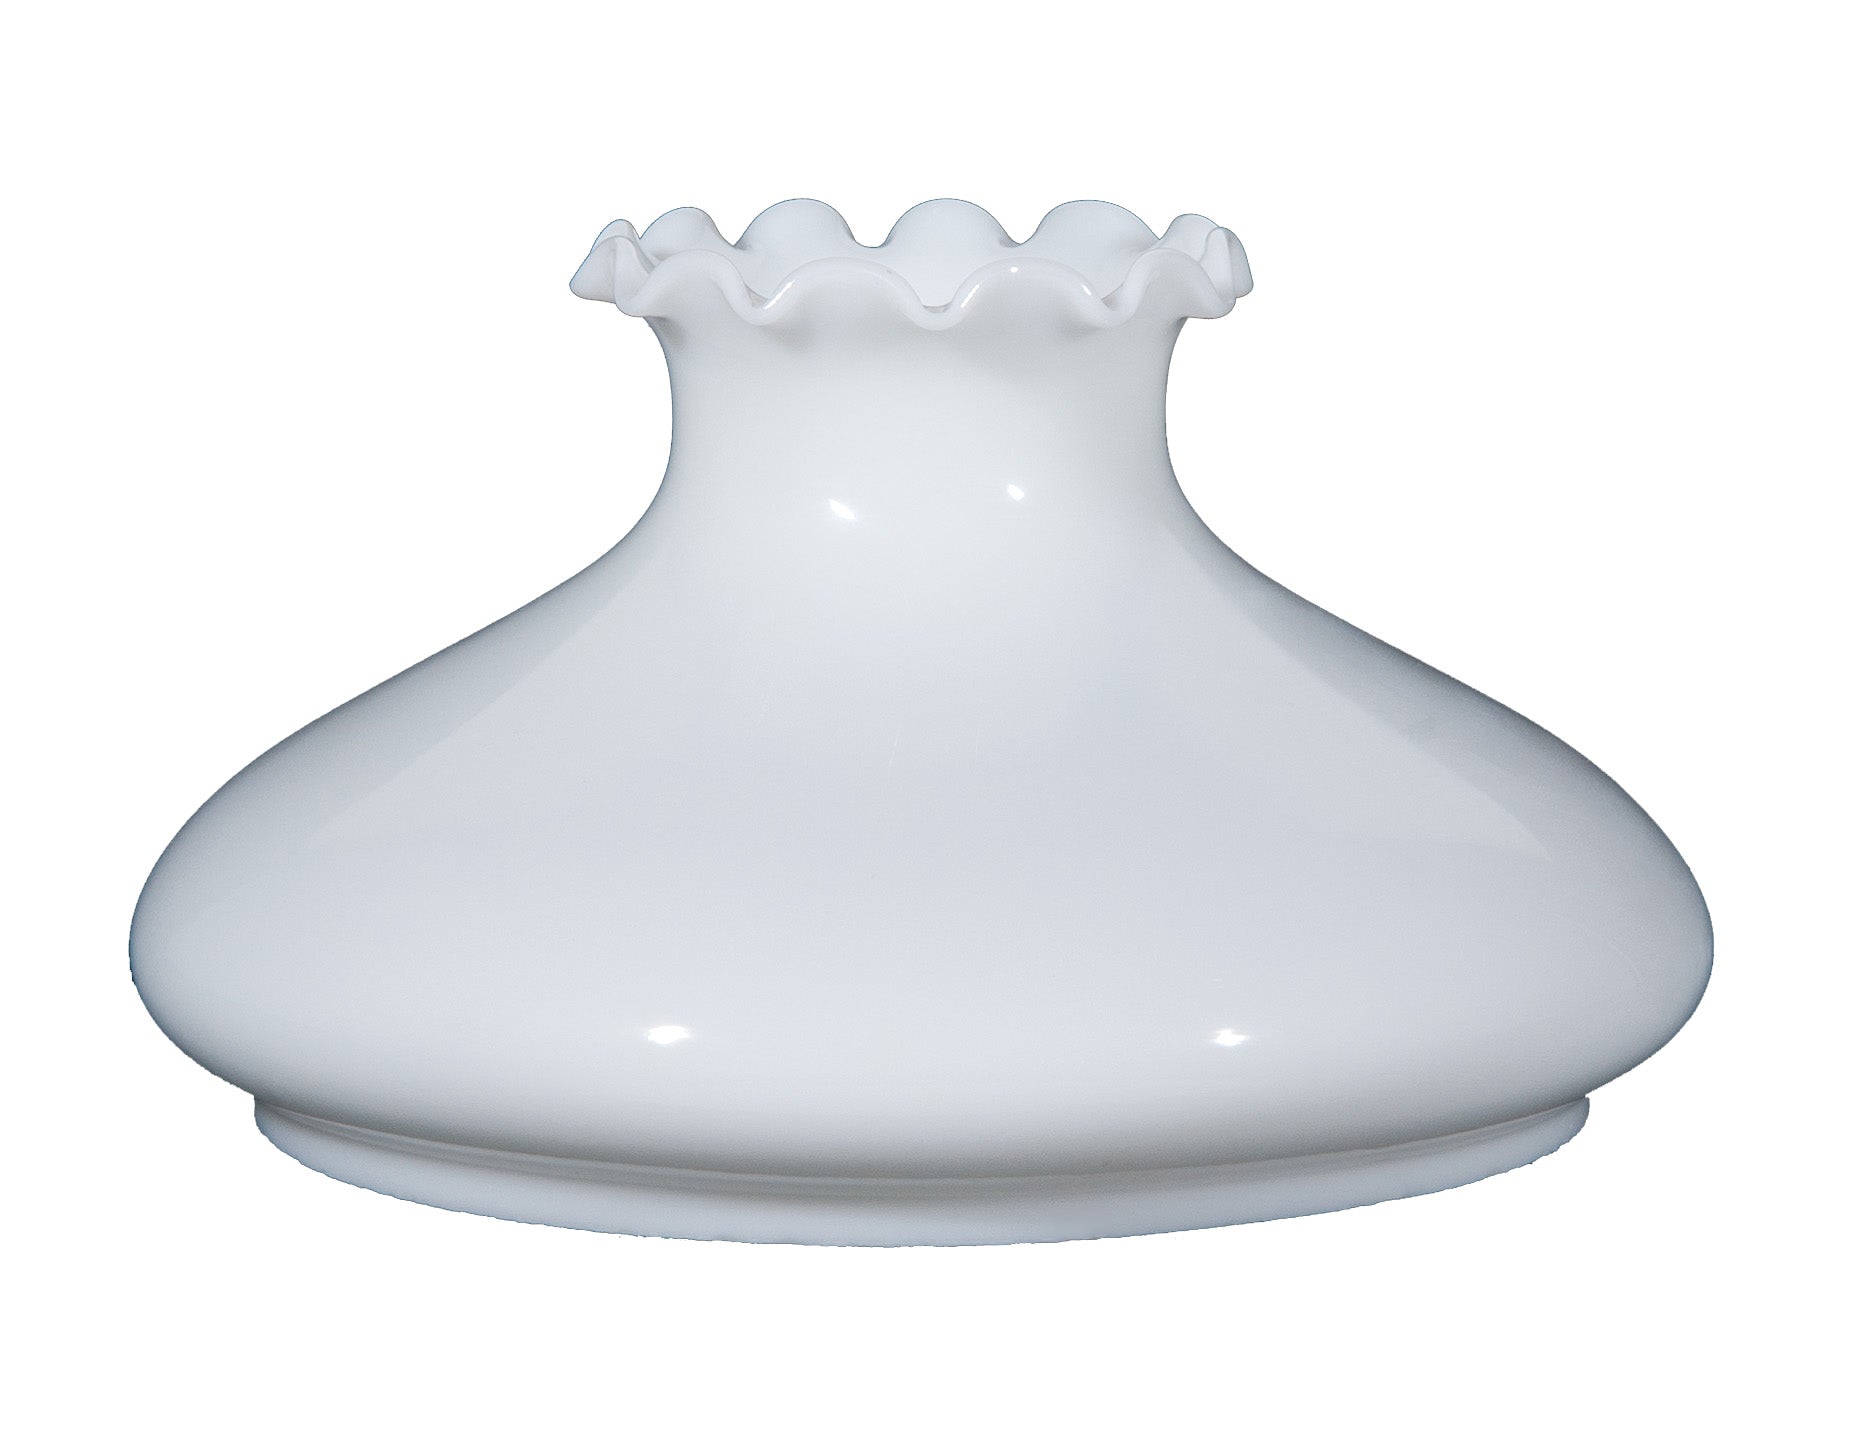 Opal Glass Tam-O-Shanter Shade, Crimped Top, 10 inch fitter